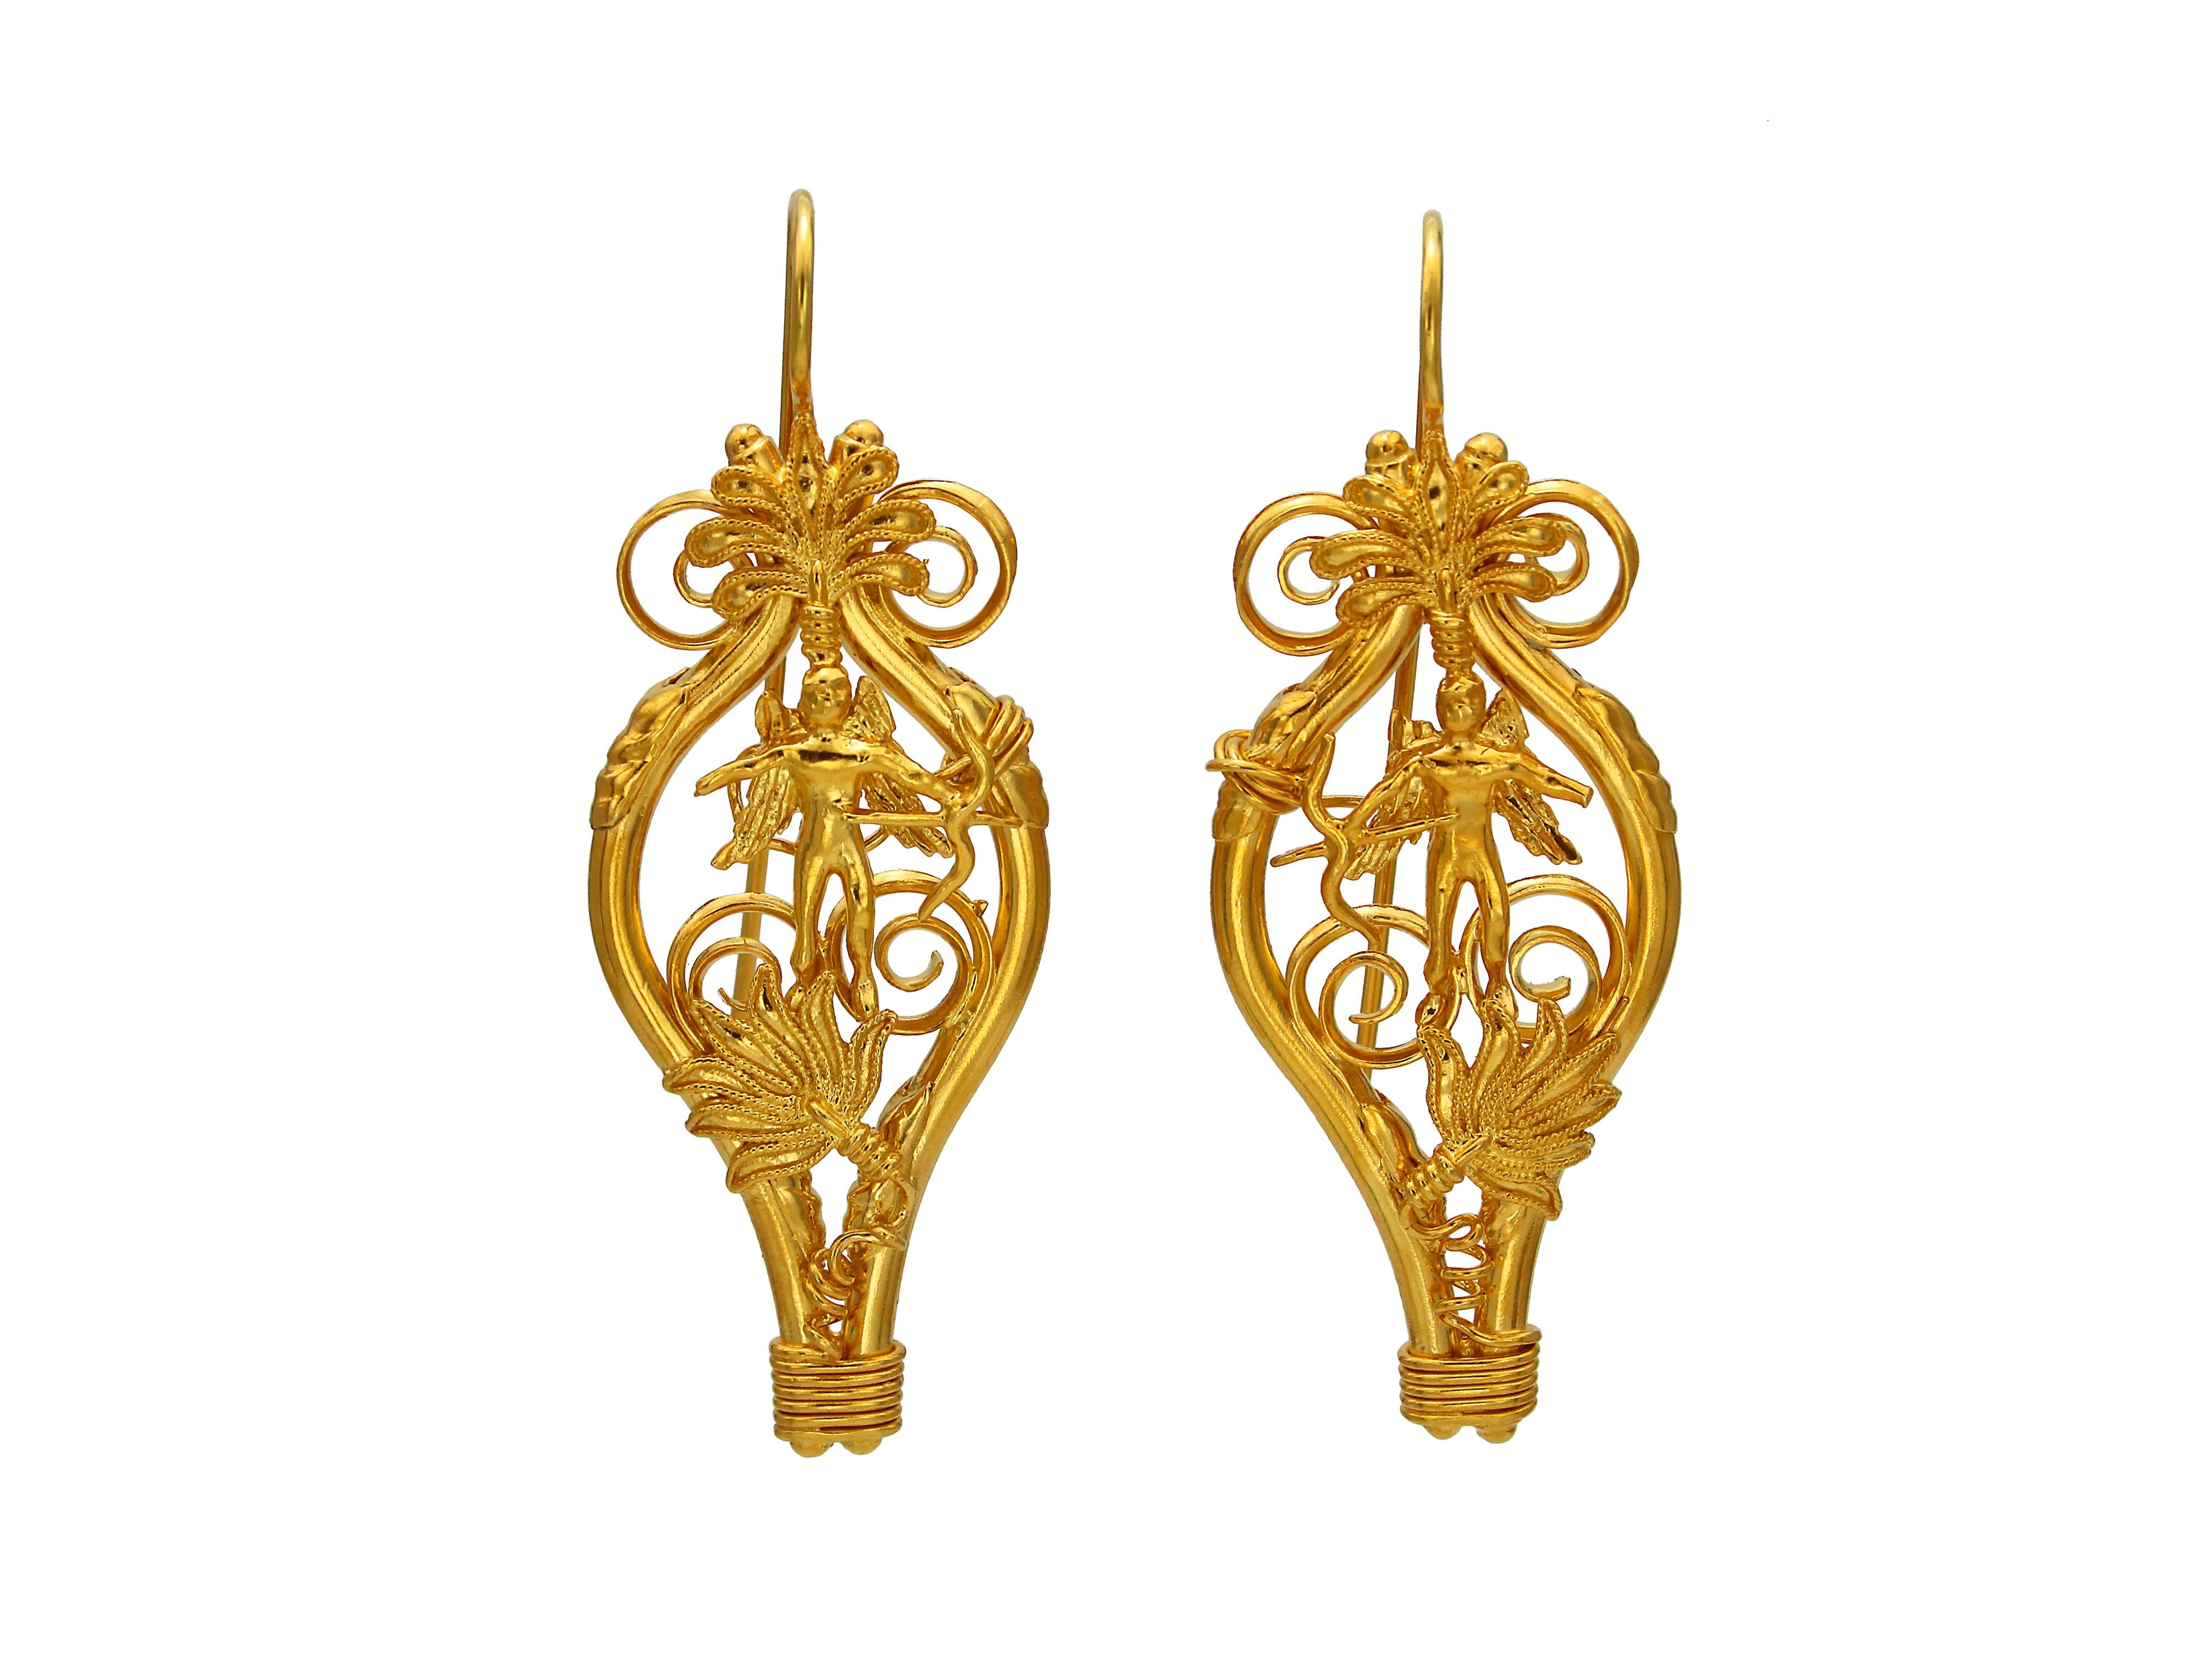 EROS (God of love) earrings. Majestic pair of earrings set in 22 karats gold inspired of the original necklace of the mid-4th century BC found in the excavation at Macedonia area where was the Palace of King Philip King of the Macedonians and father